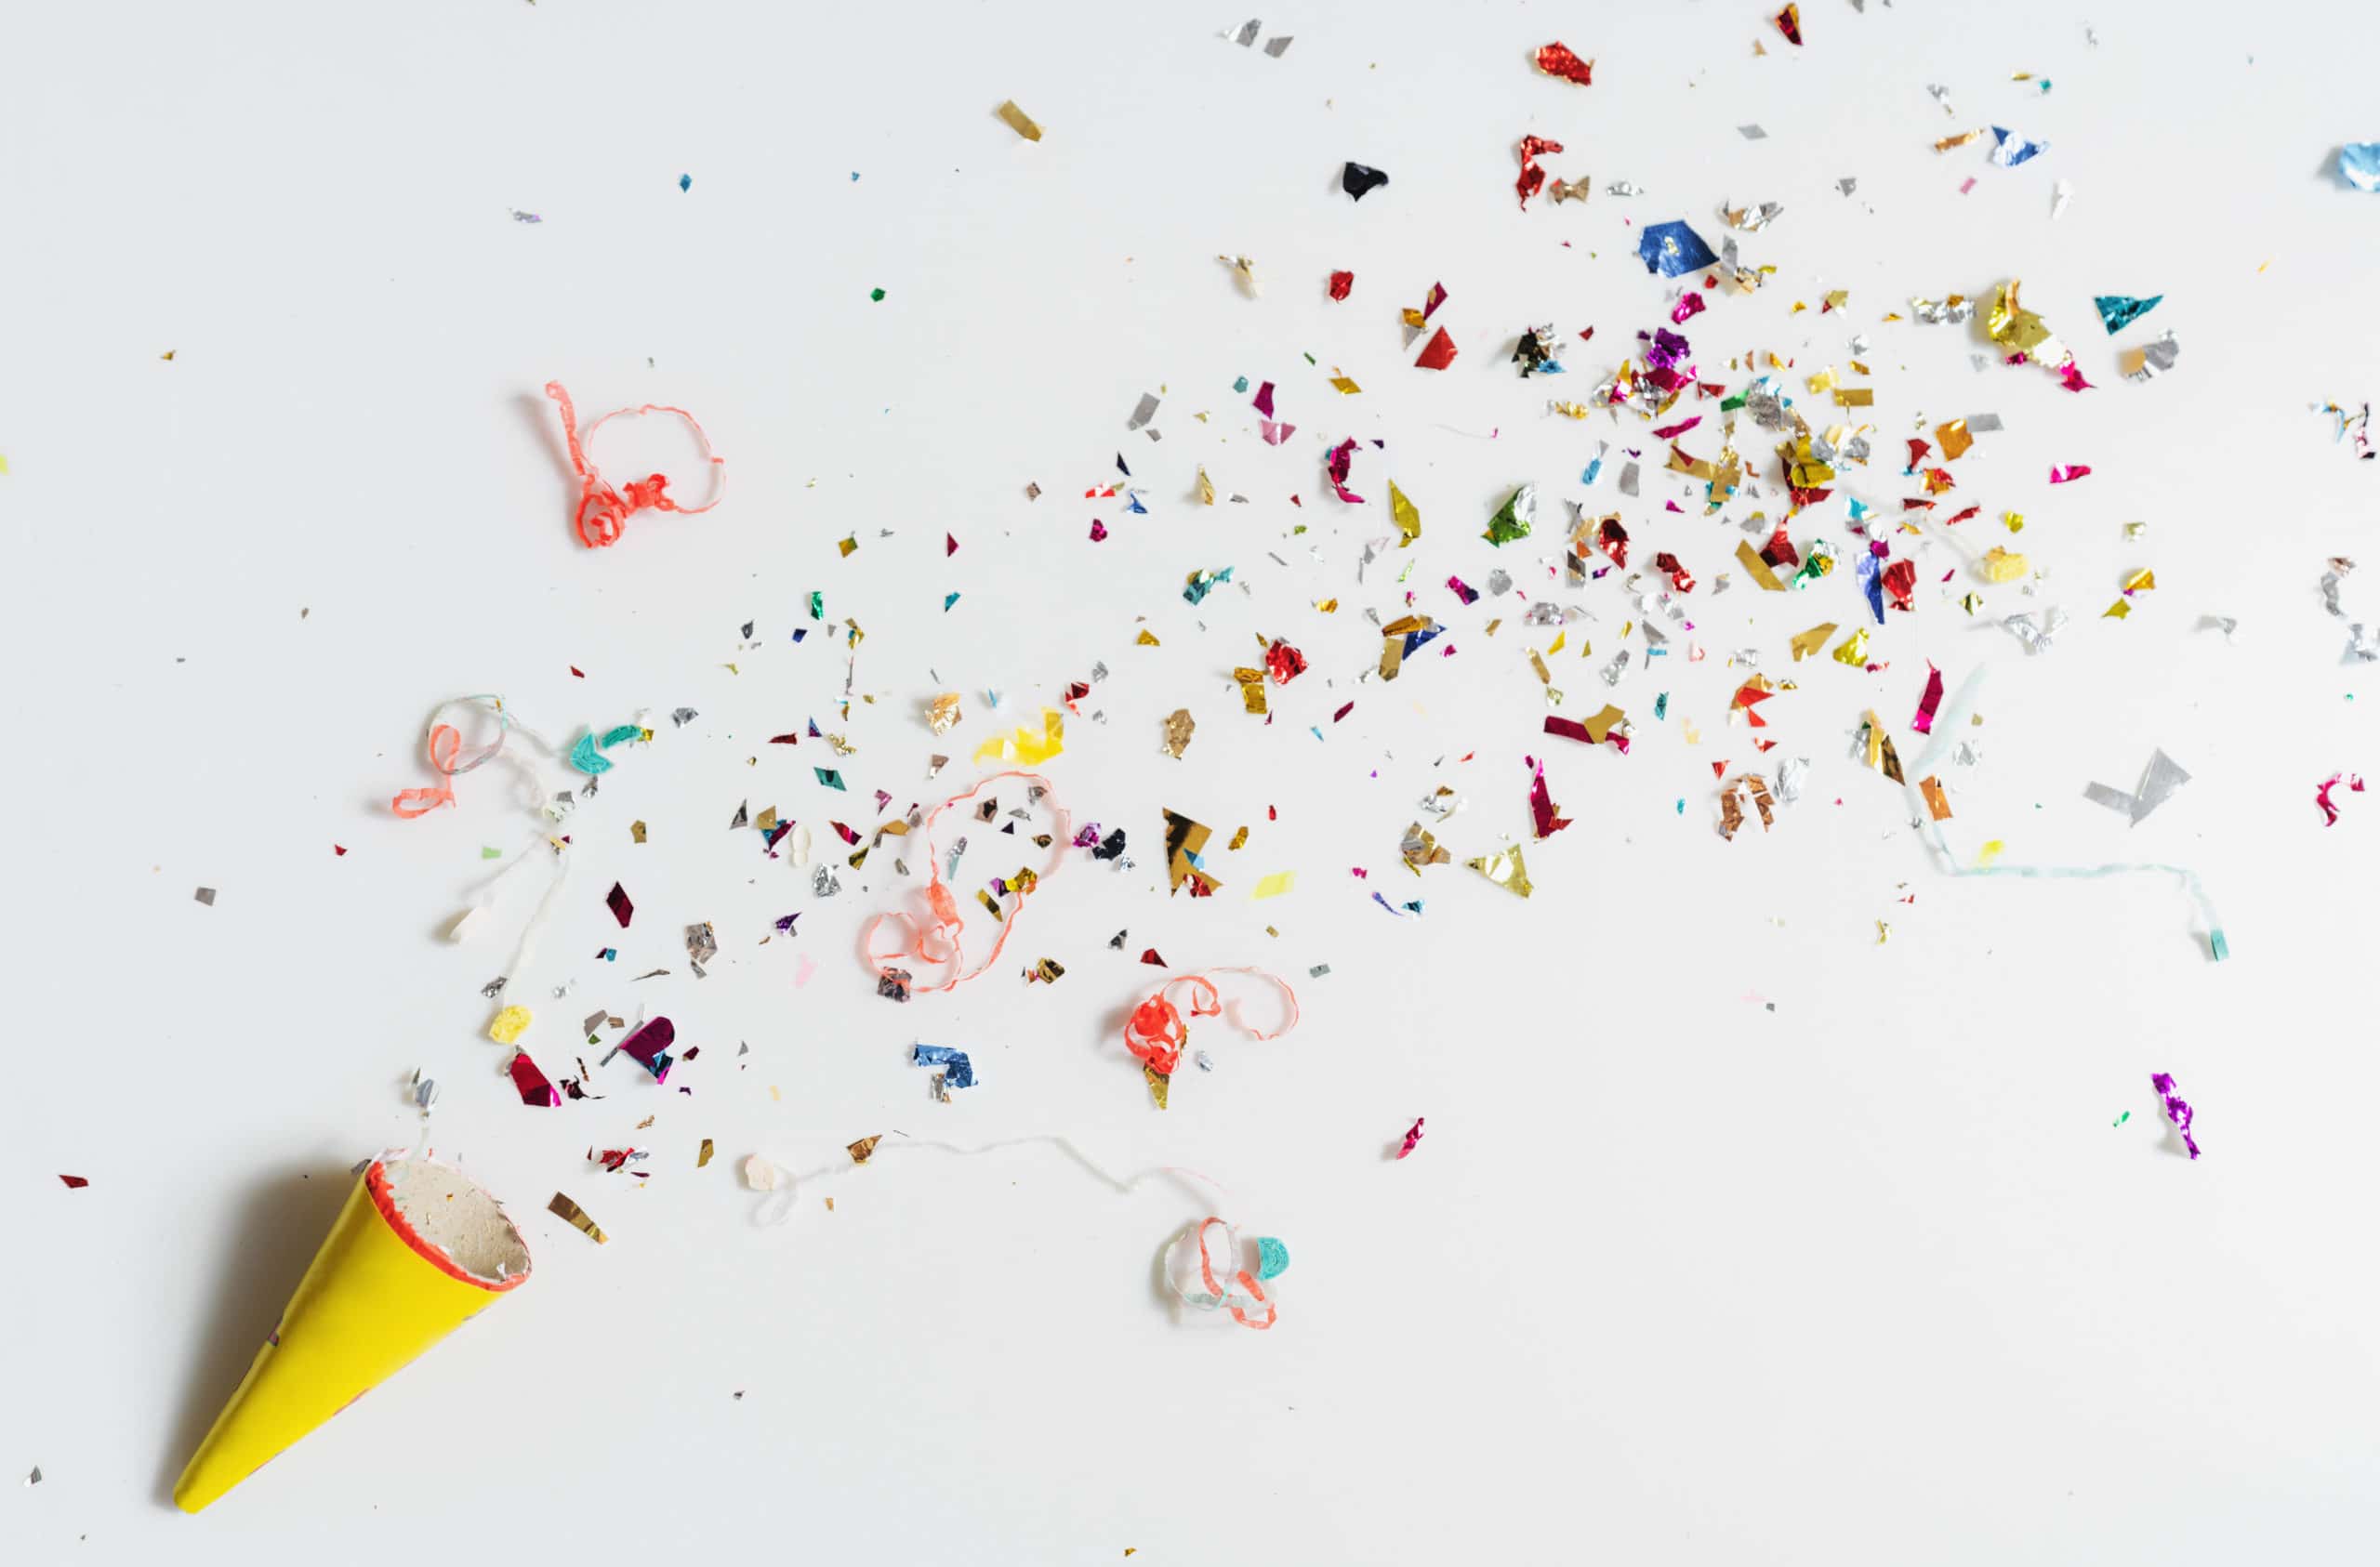 Exploding party popper on white background